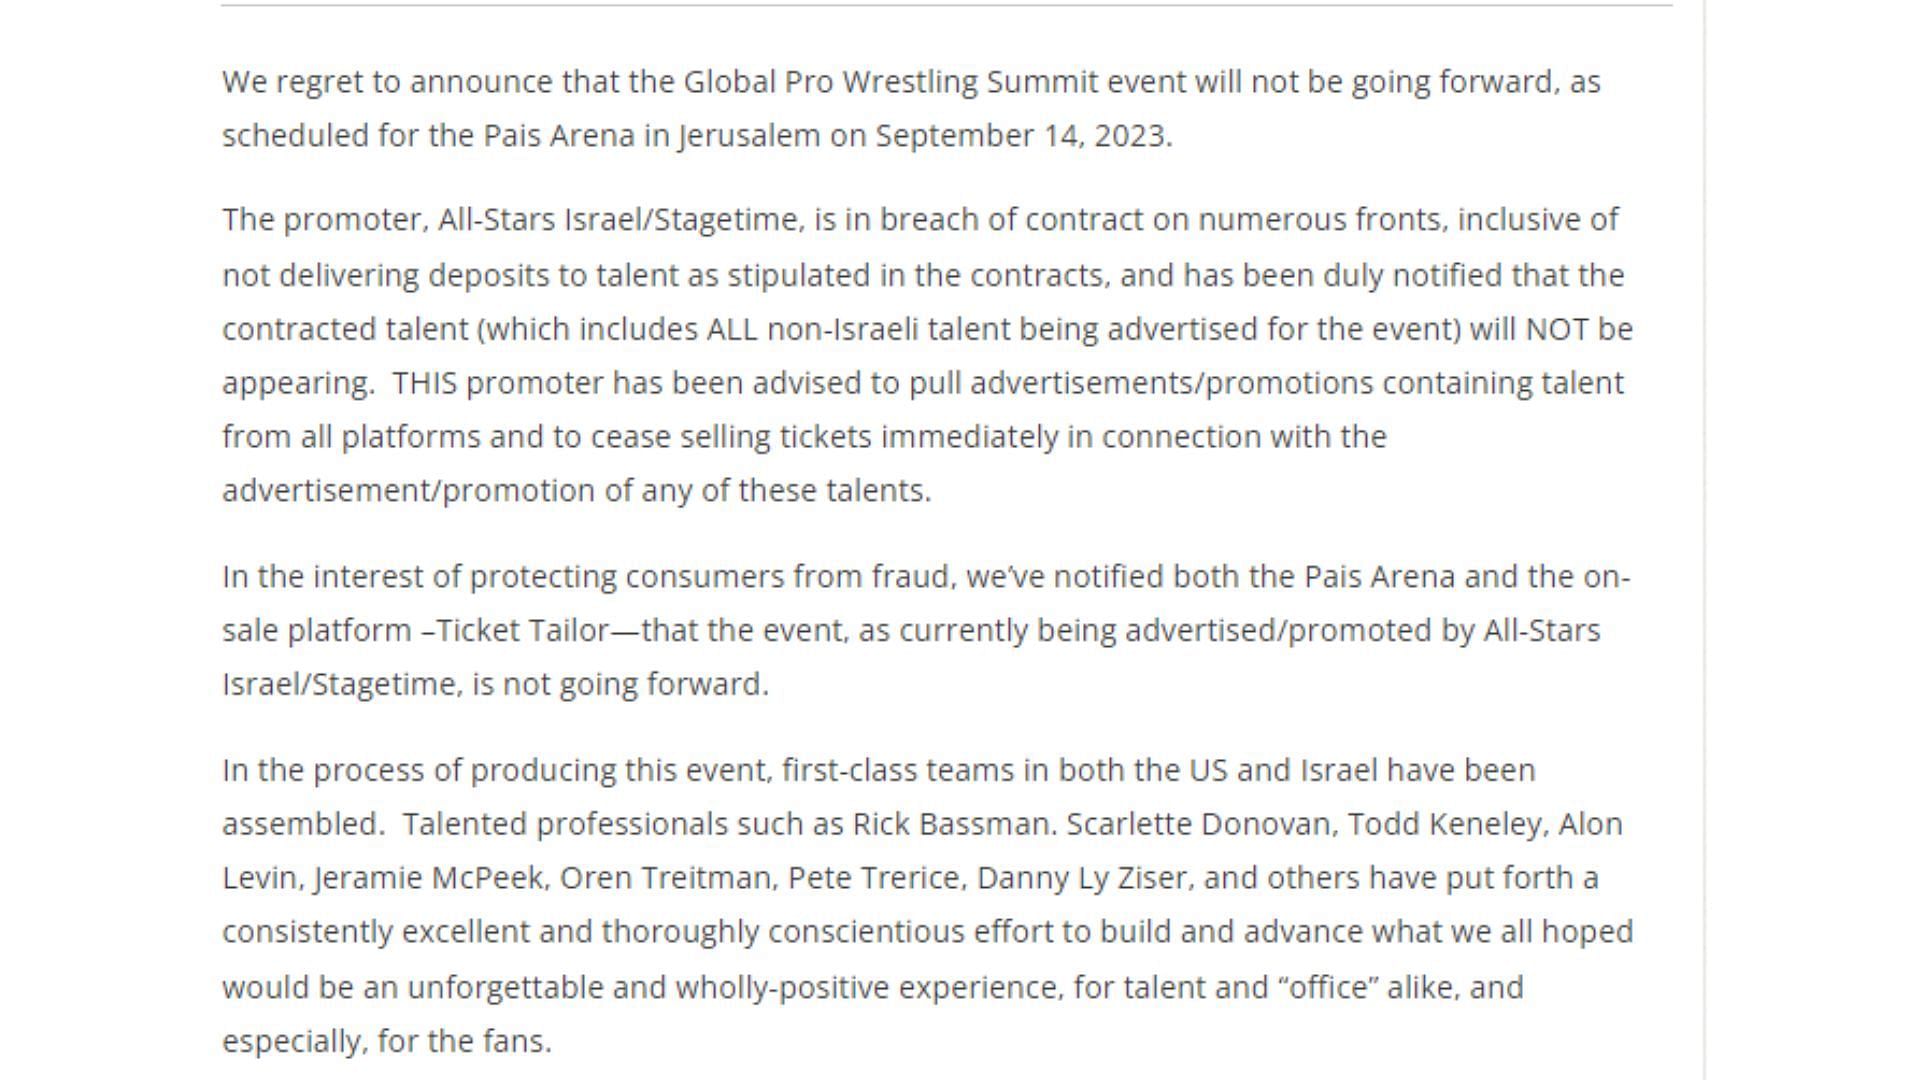 A brief excerpt of the press release shared by Haus of Wrestling.